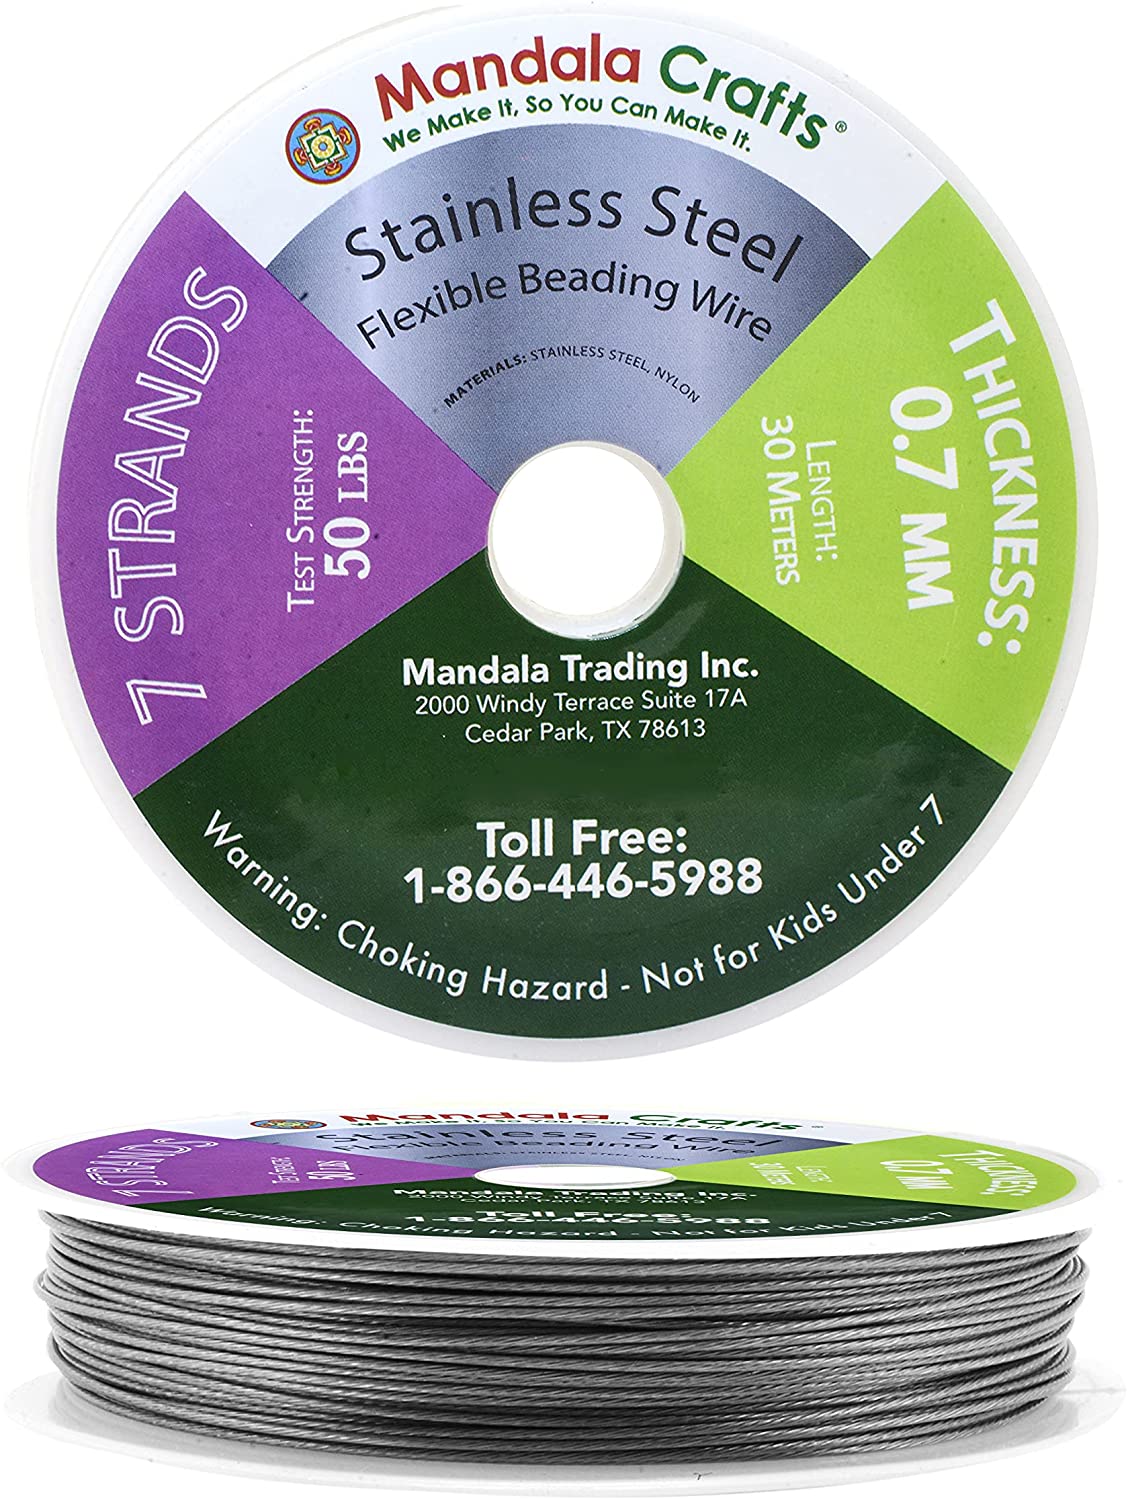 22 Gauge Stainless Steel Wire for Jewelry Making, Bailing Wire